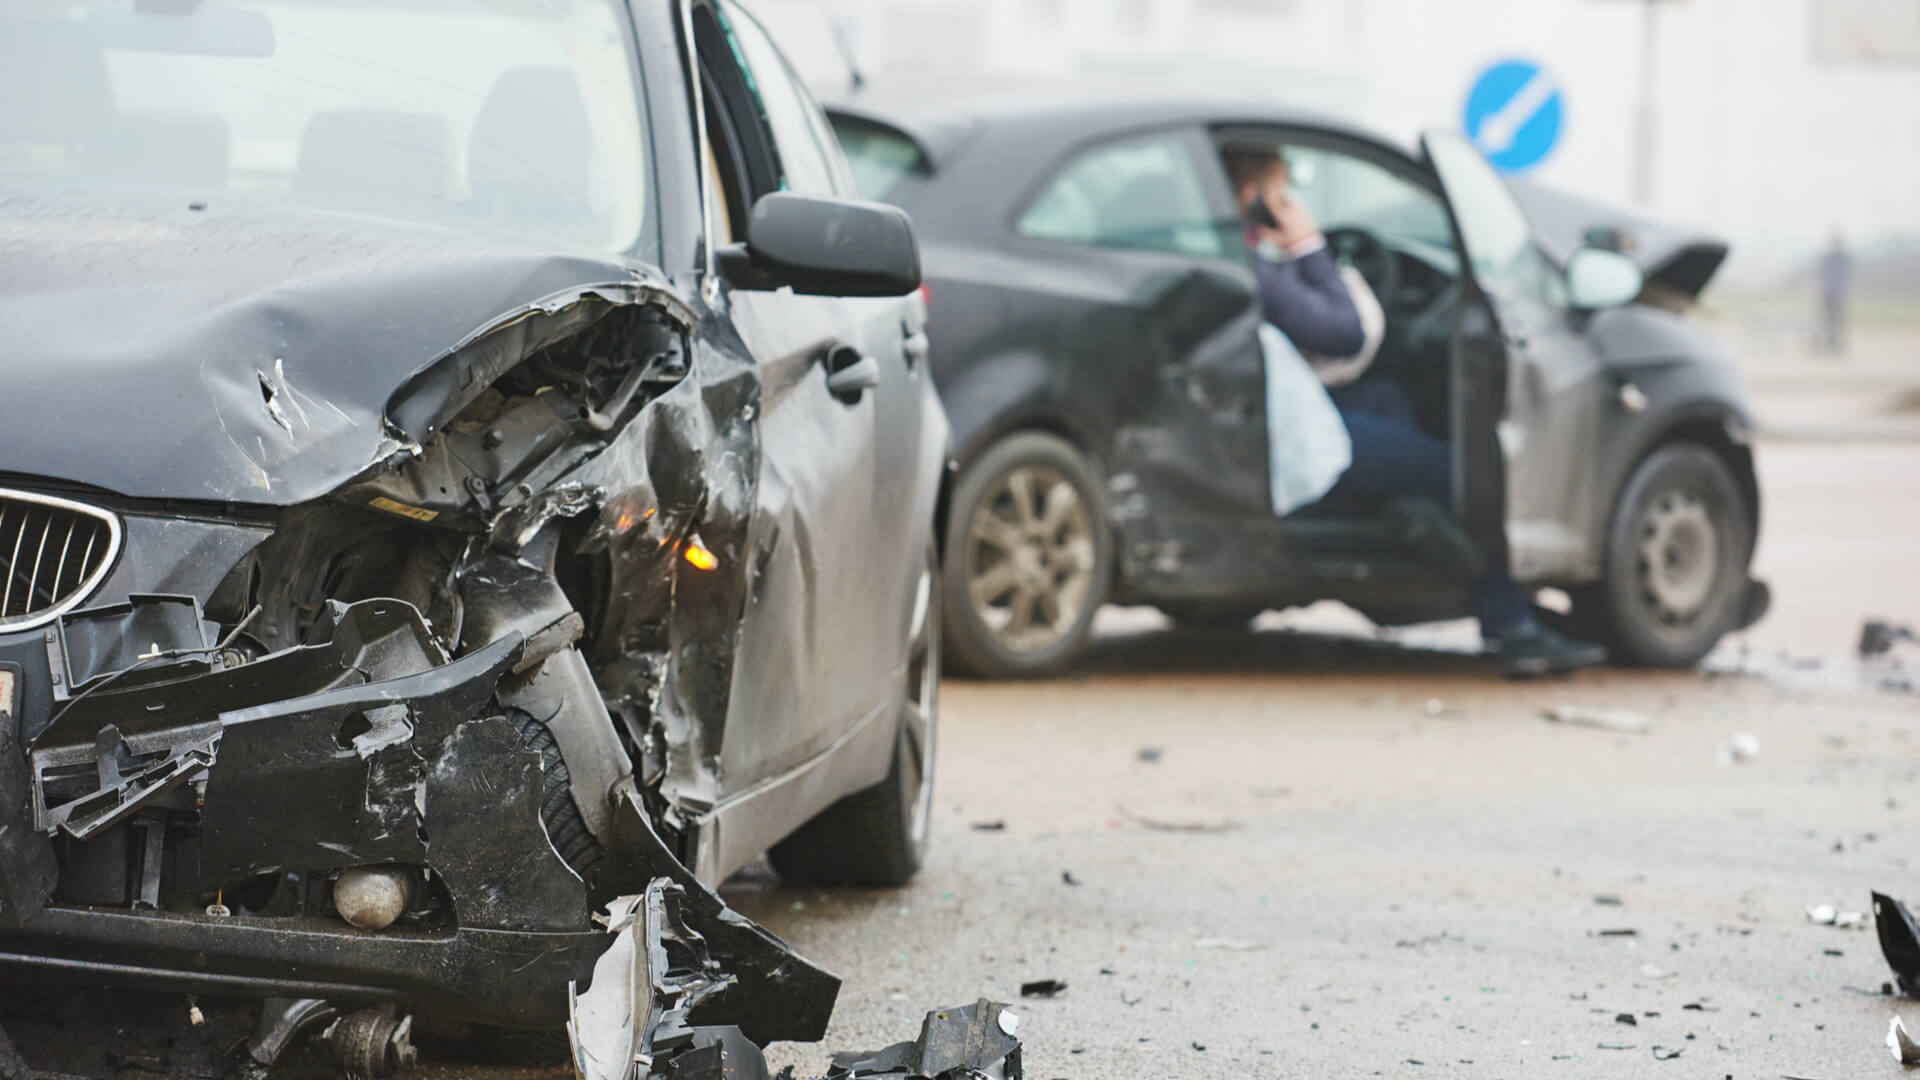 Hurt in an Iowa car accident? Get help from the Galligan Law auto accident attorneys in Des Moines, Iowa